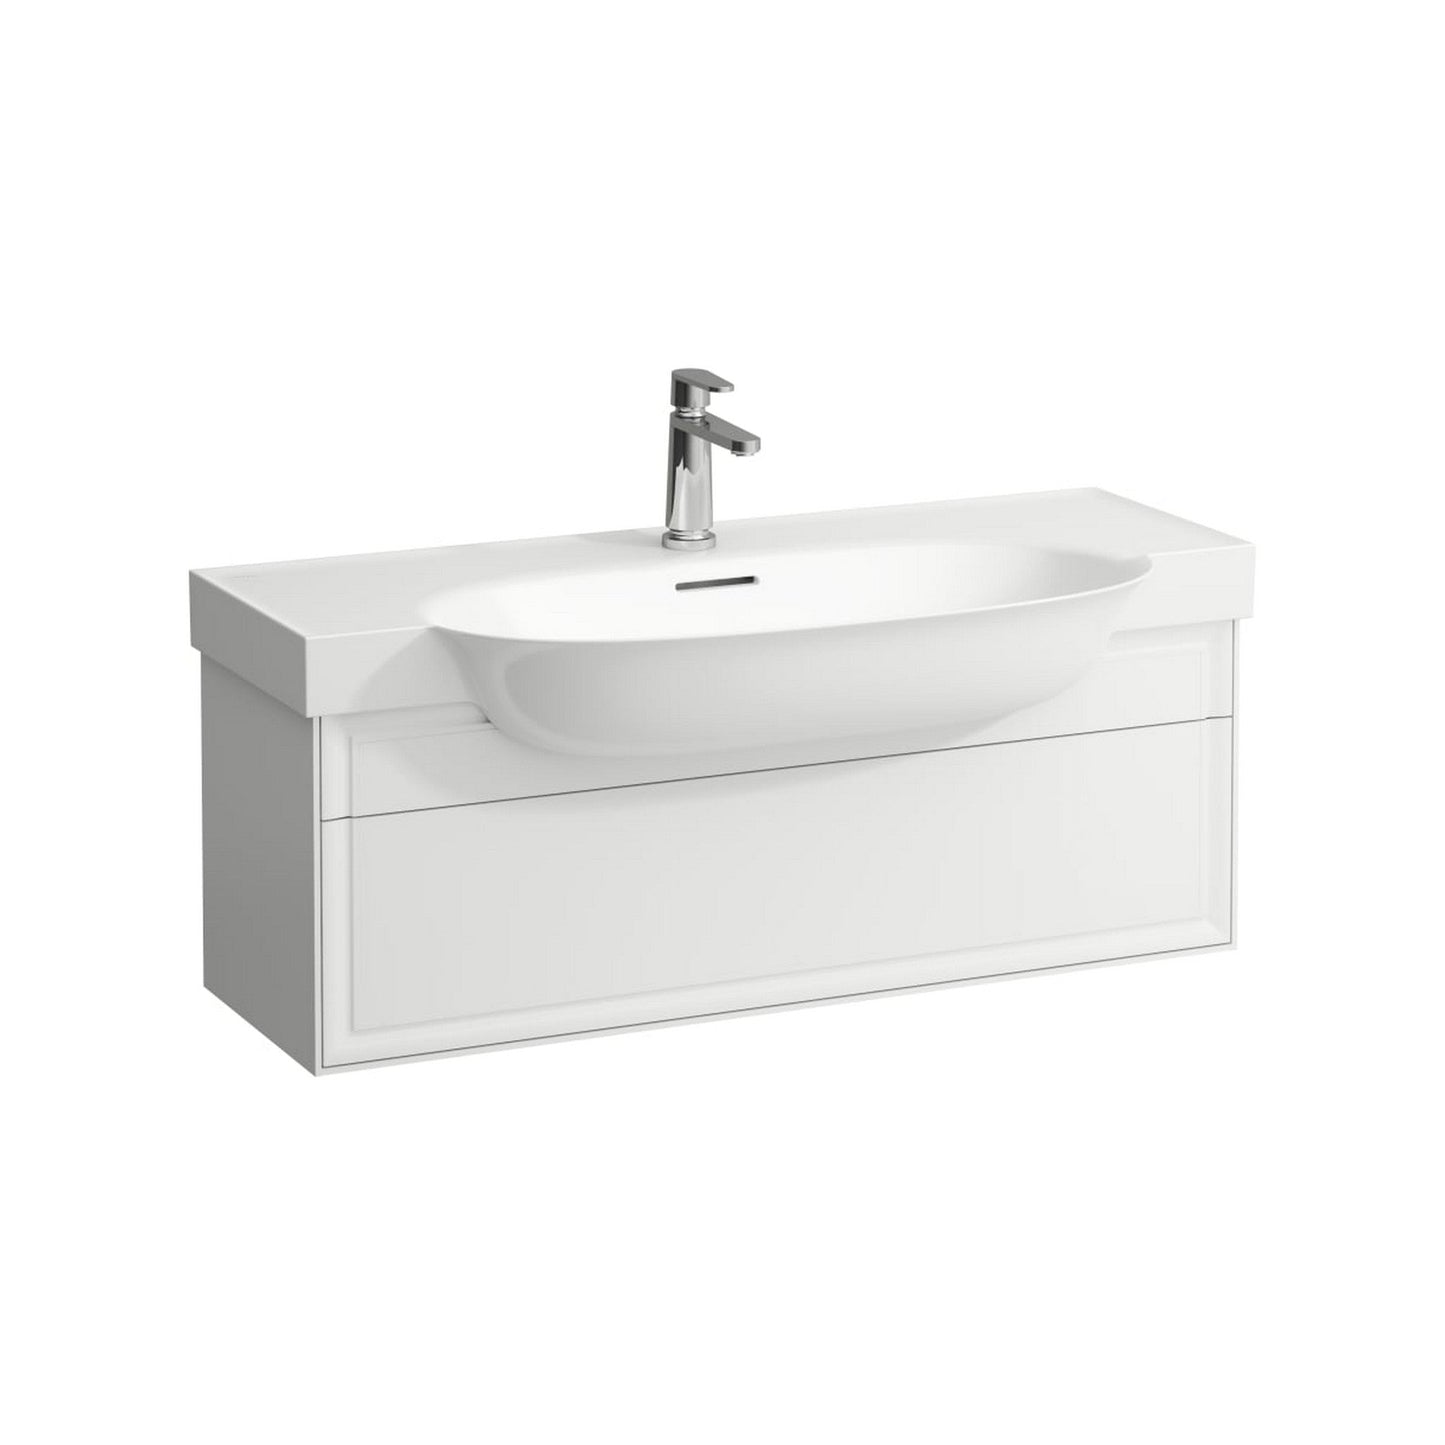 Laufen New Classic 38" 1-Drawer White Wall-Mounted Vanity for New Classic Bathroom Sink Model: H813857